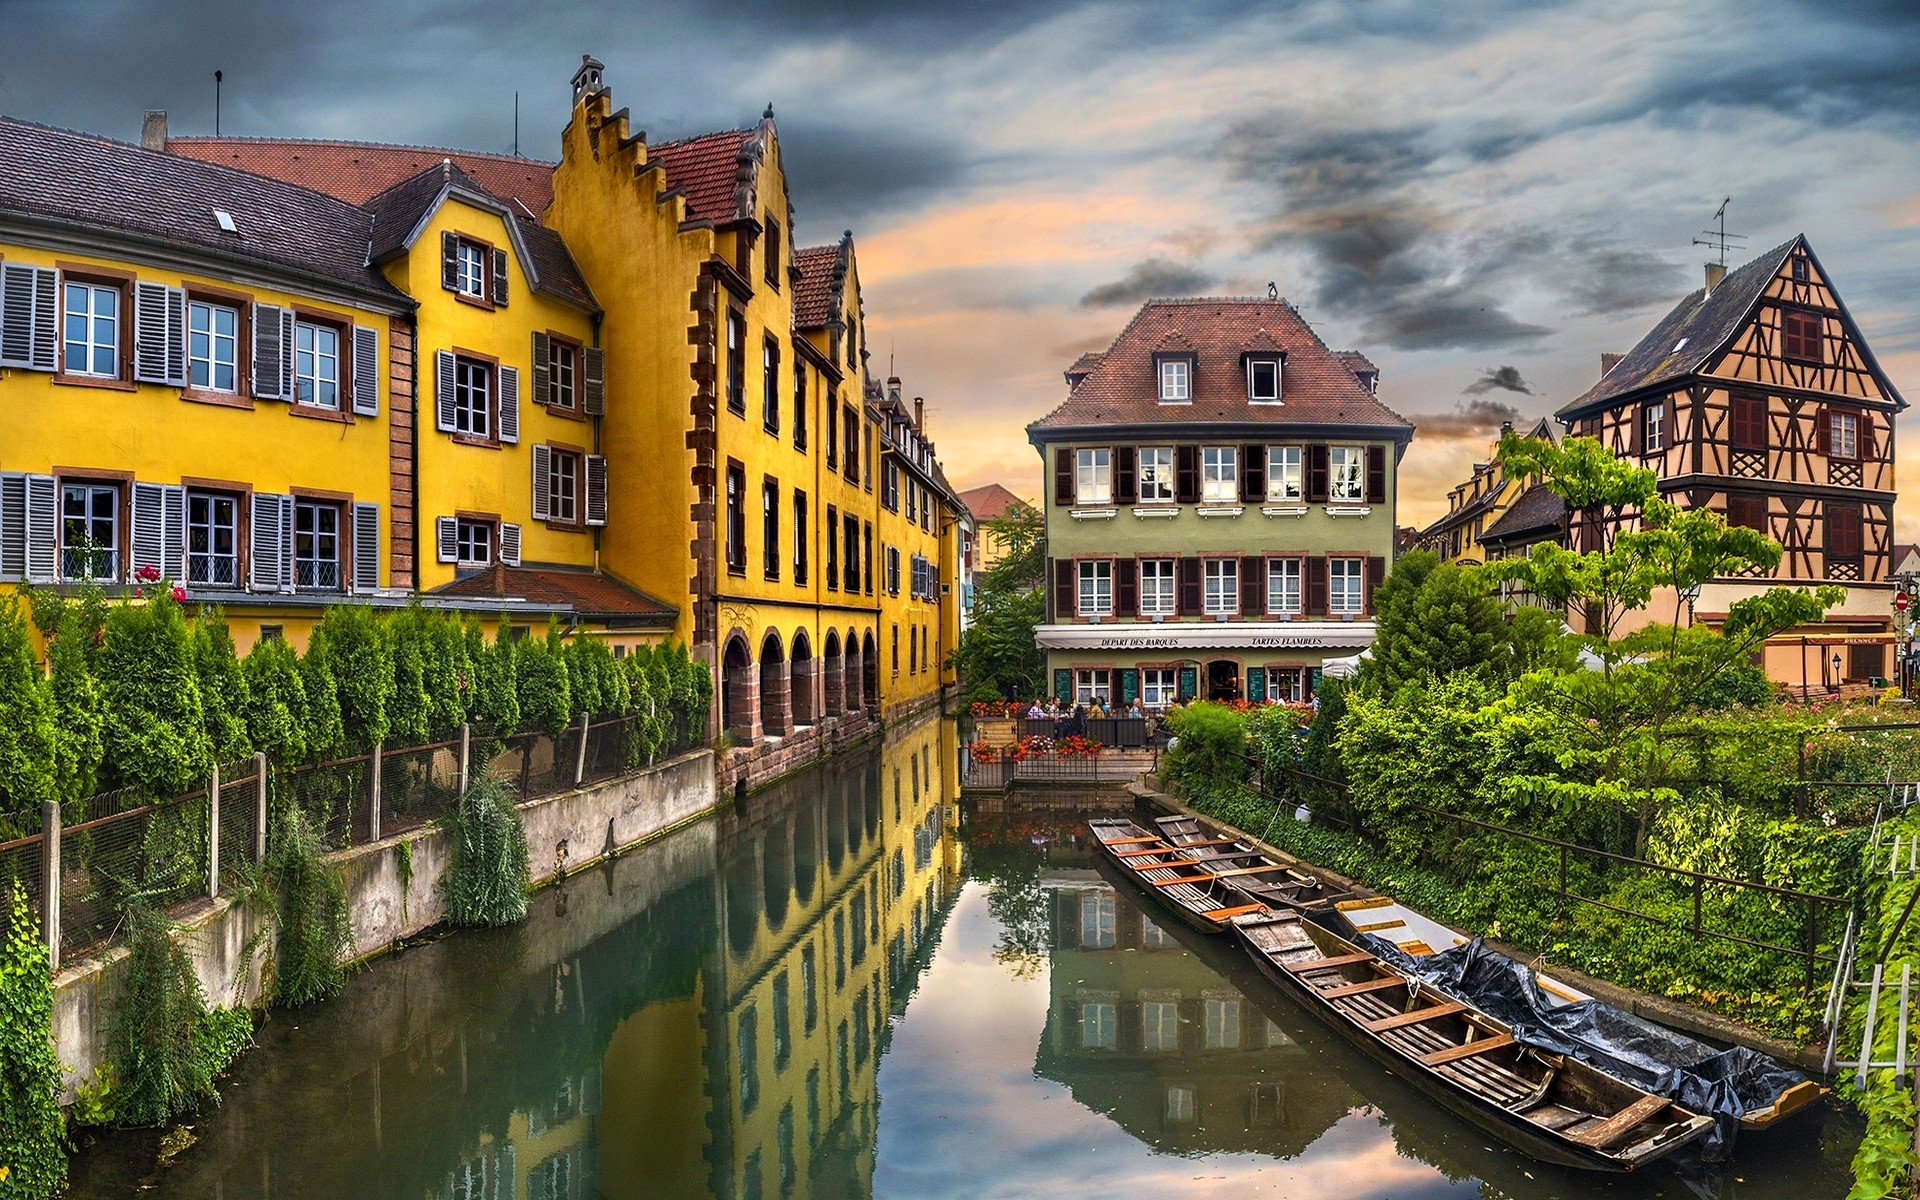 #landscape, #architecture, #Europe, #city, #water, #old building, #trees, #France, #reflection, #Colmar, #building, #canal, #boat wallpaper. Mocah HD Wallpaper